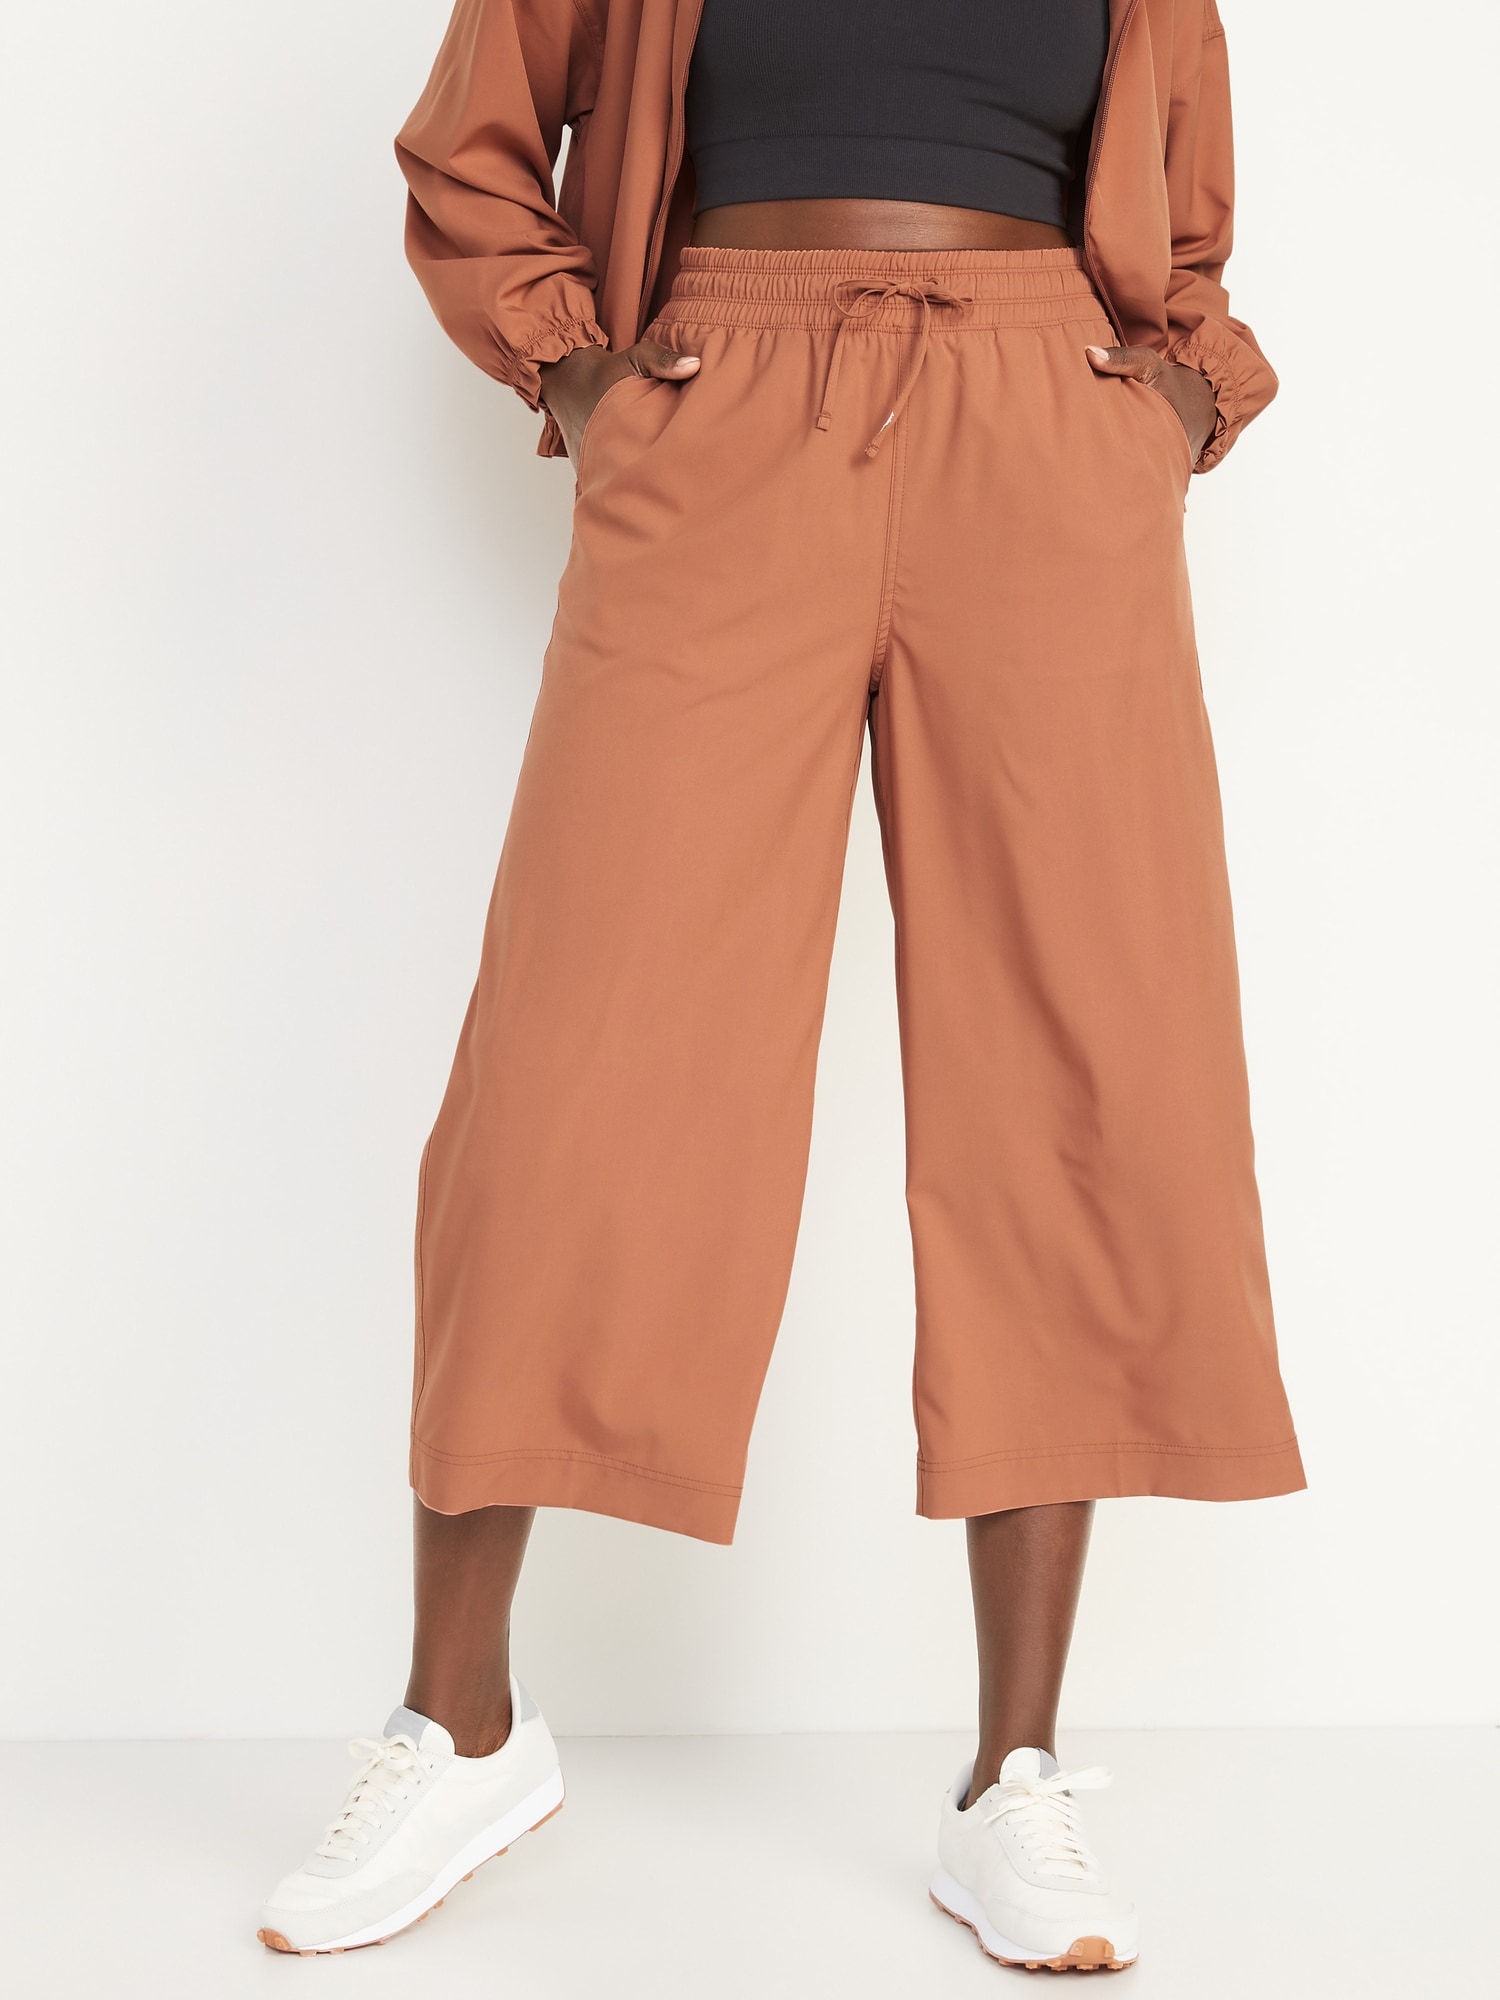 Old Navy Women's Extra High-Waisted Stretchtech Cropped Wide-Leg Pants - Brown - Plus Size 4X